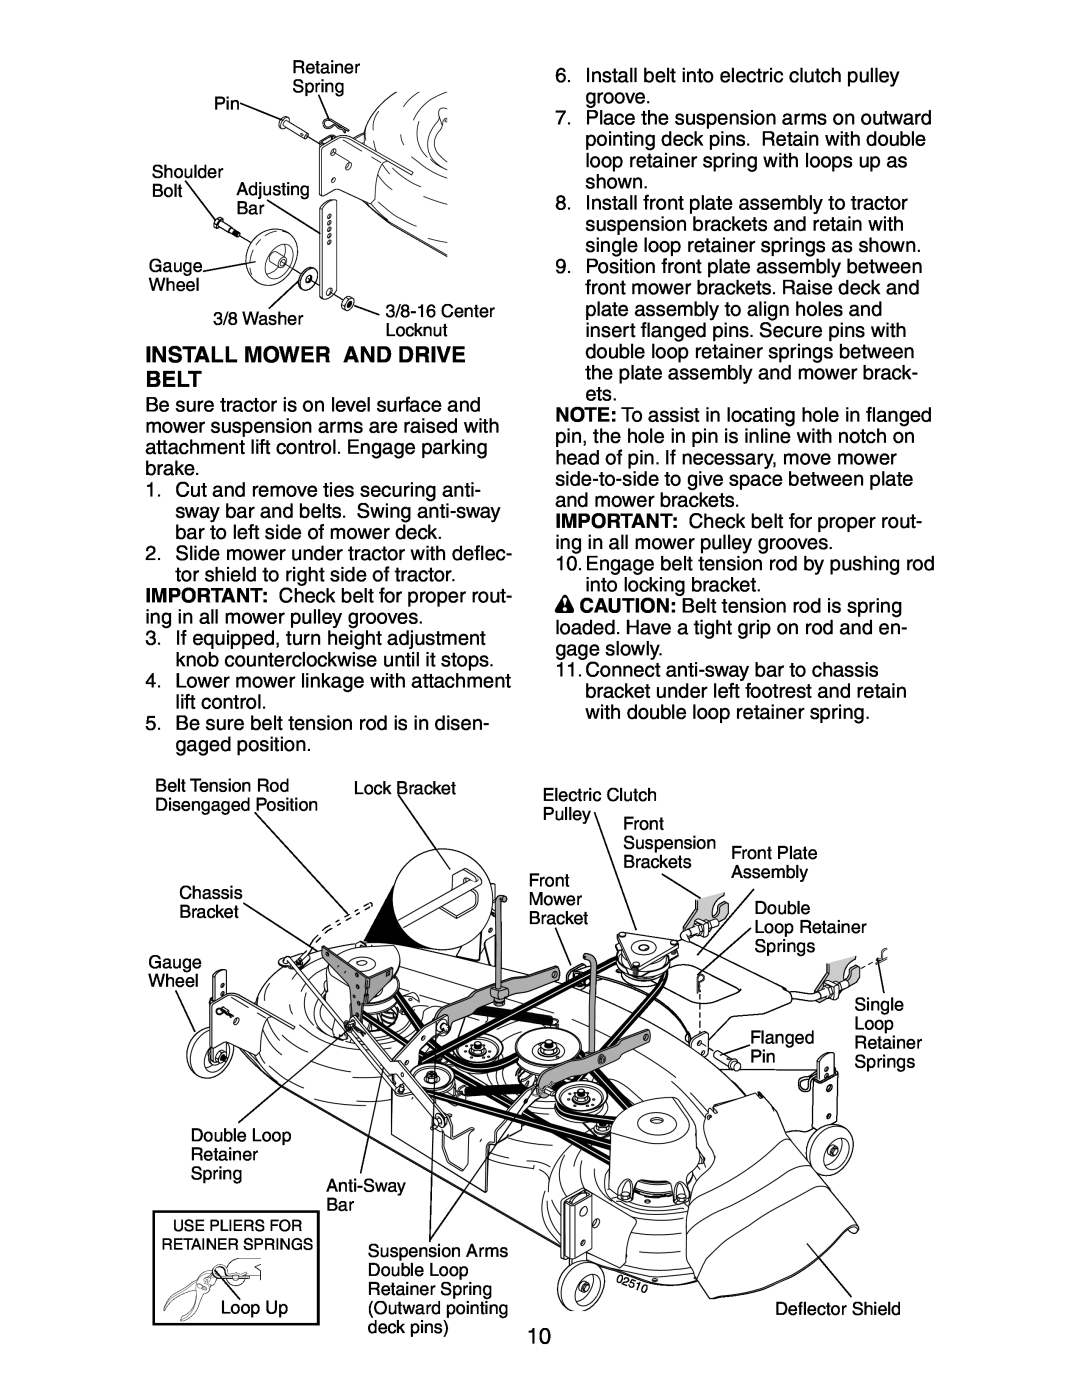 Poulan COGT22H48A manual Install Mower And Drive Belt 